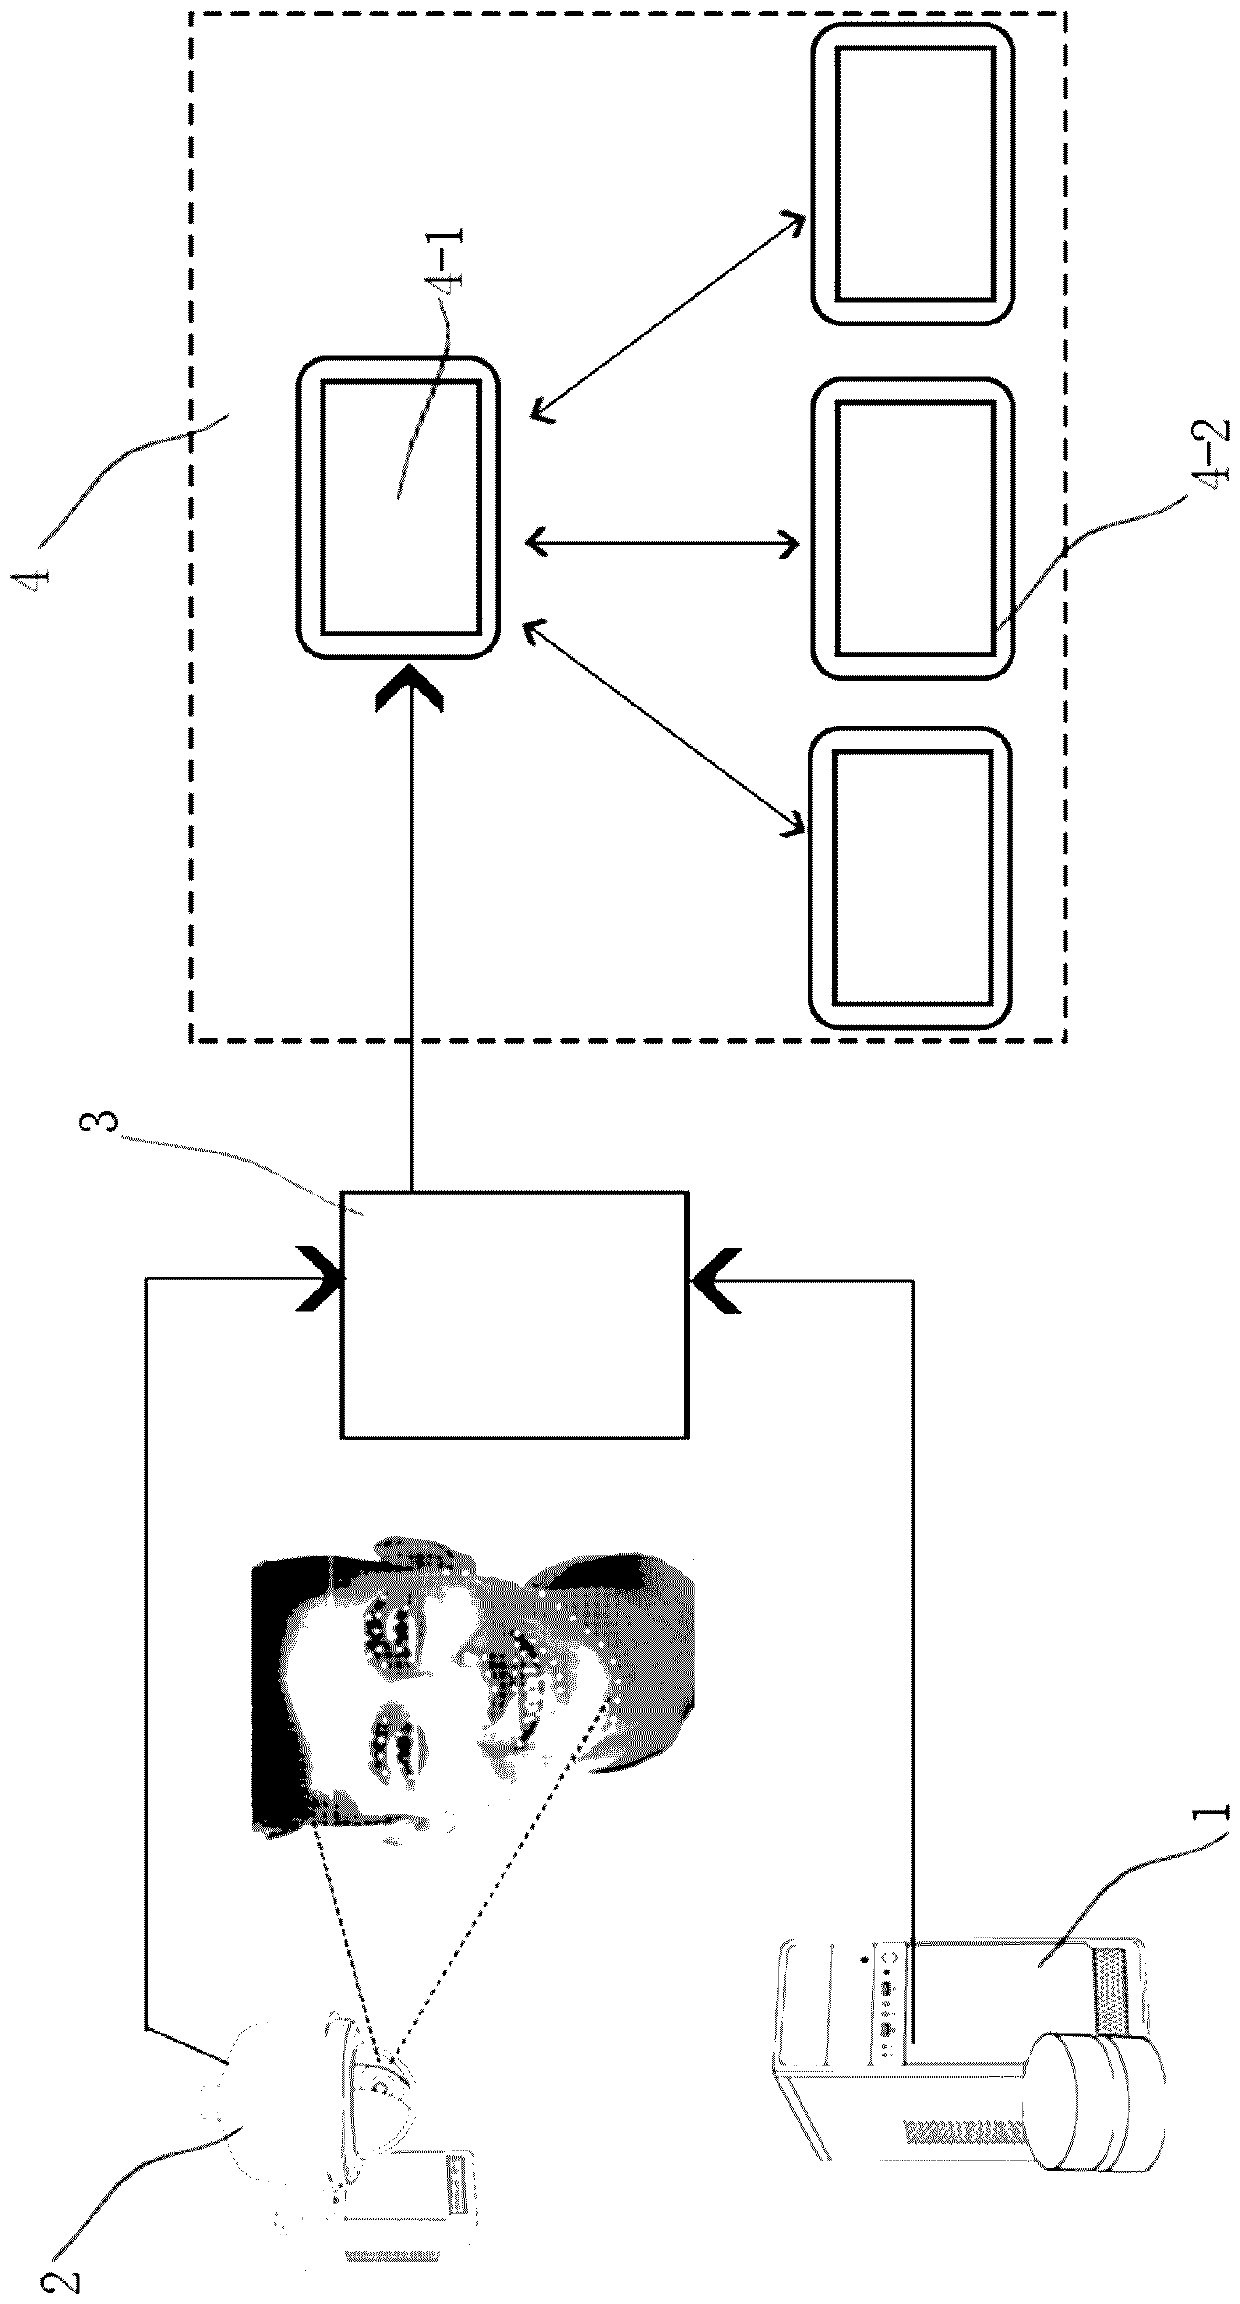 Intelligent interactive teaching system with emotion recognition function